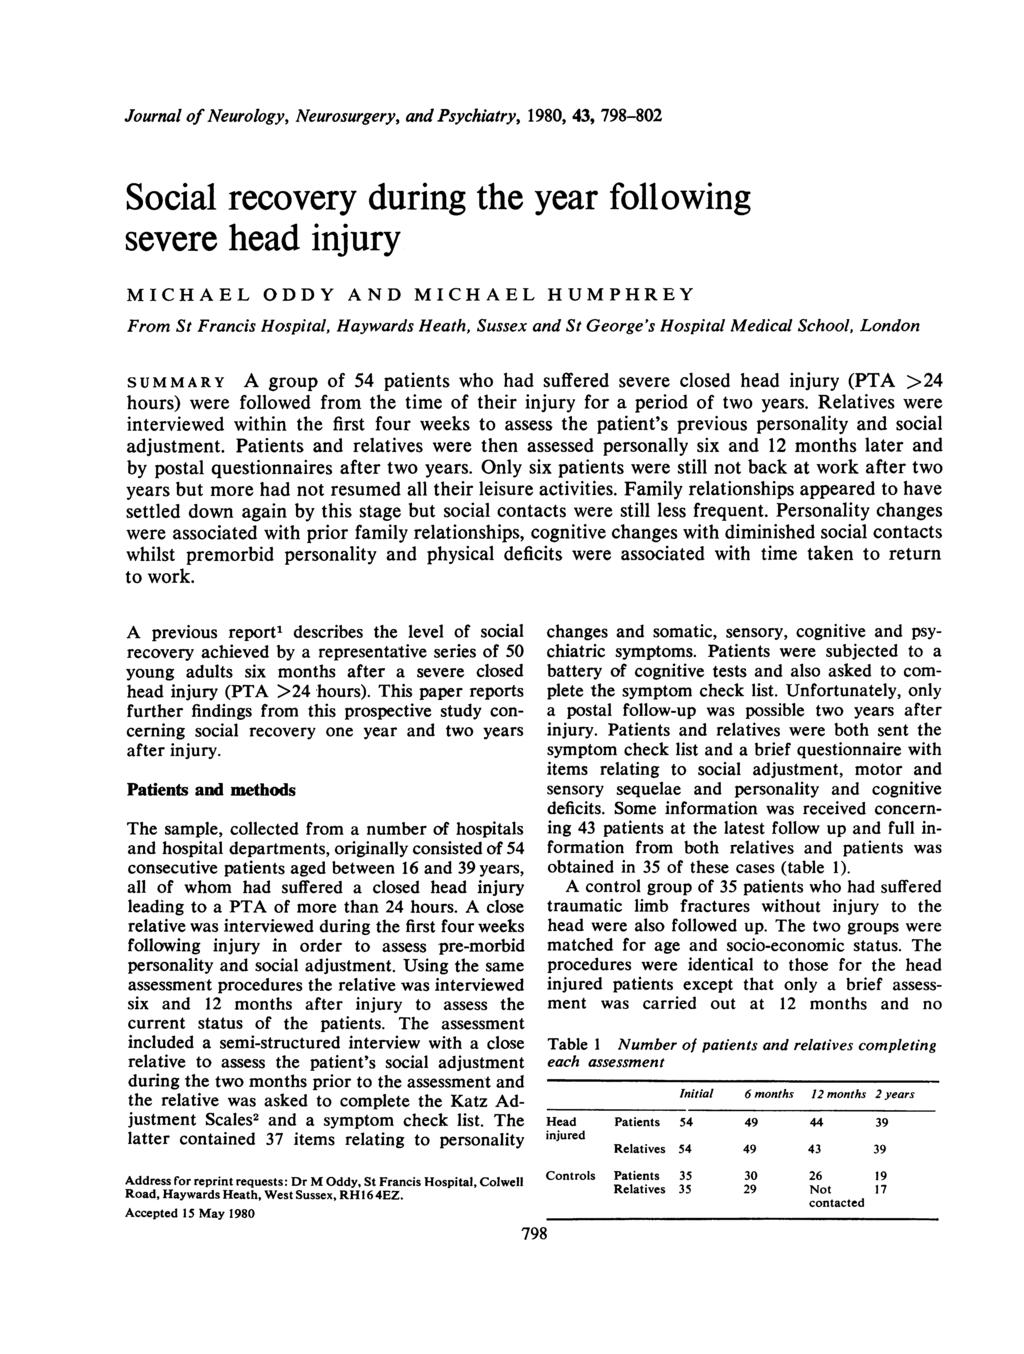 Journal of Neurology, Neurosurgery, and Psychiatry, 1980, 43, 798-802 Social recovery during the year following severe head injury MICHAEL ODDY AND MICHAEL HUMPHREY From St Francis Hospital, Haywards